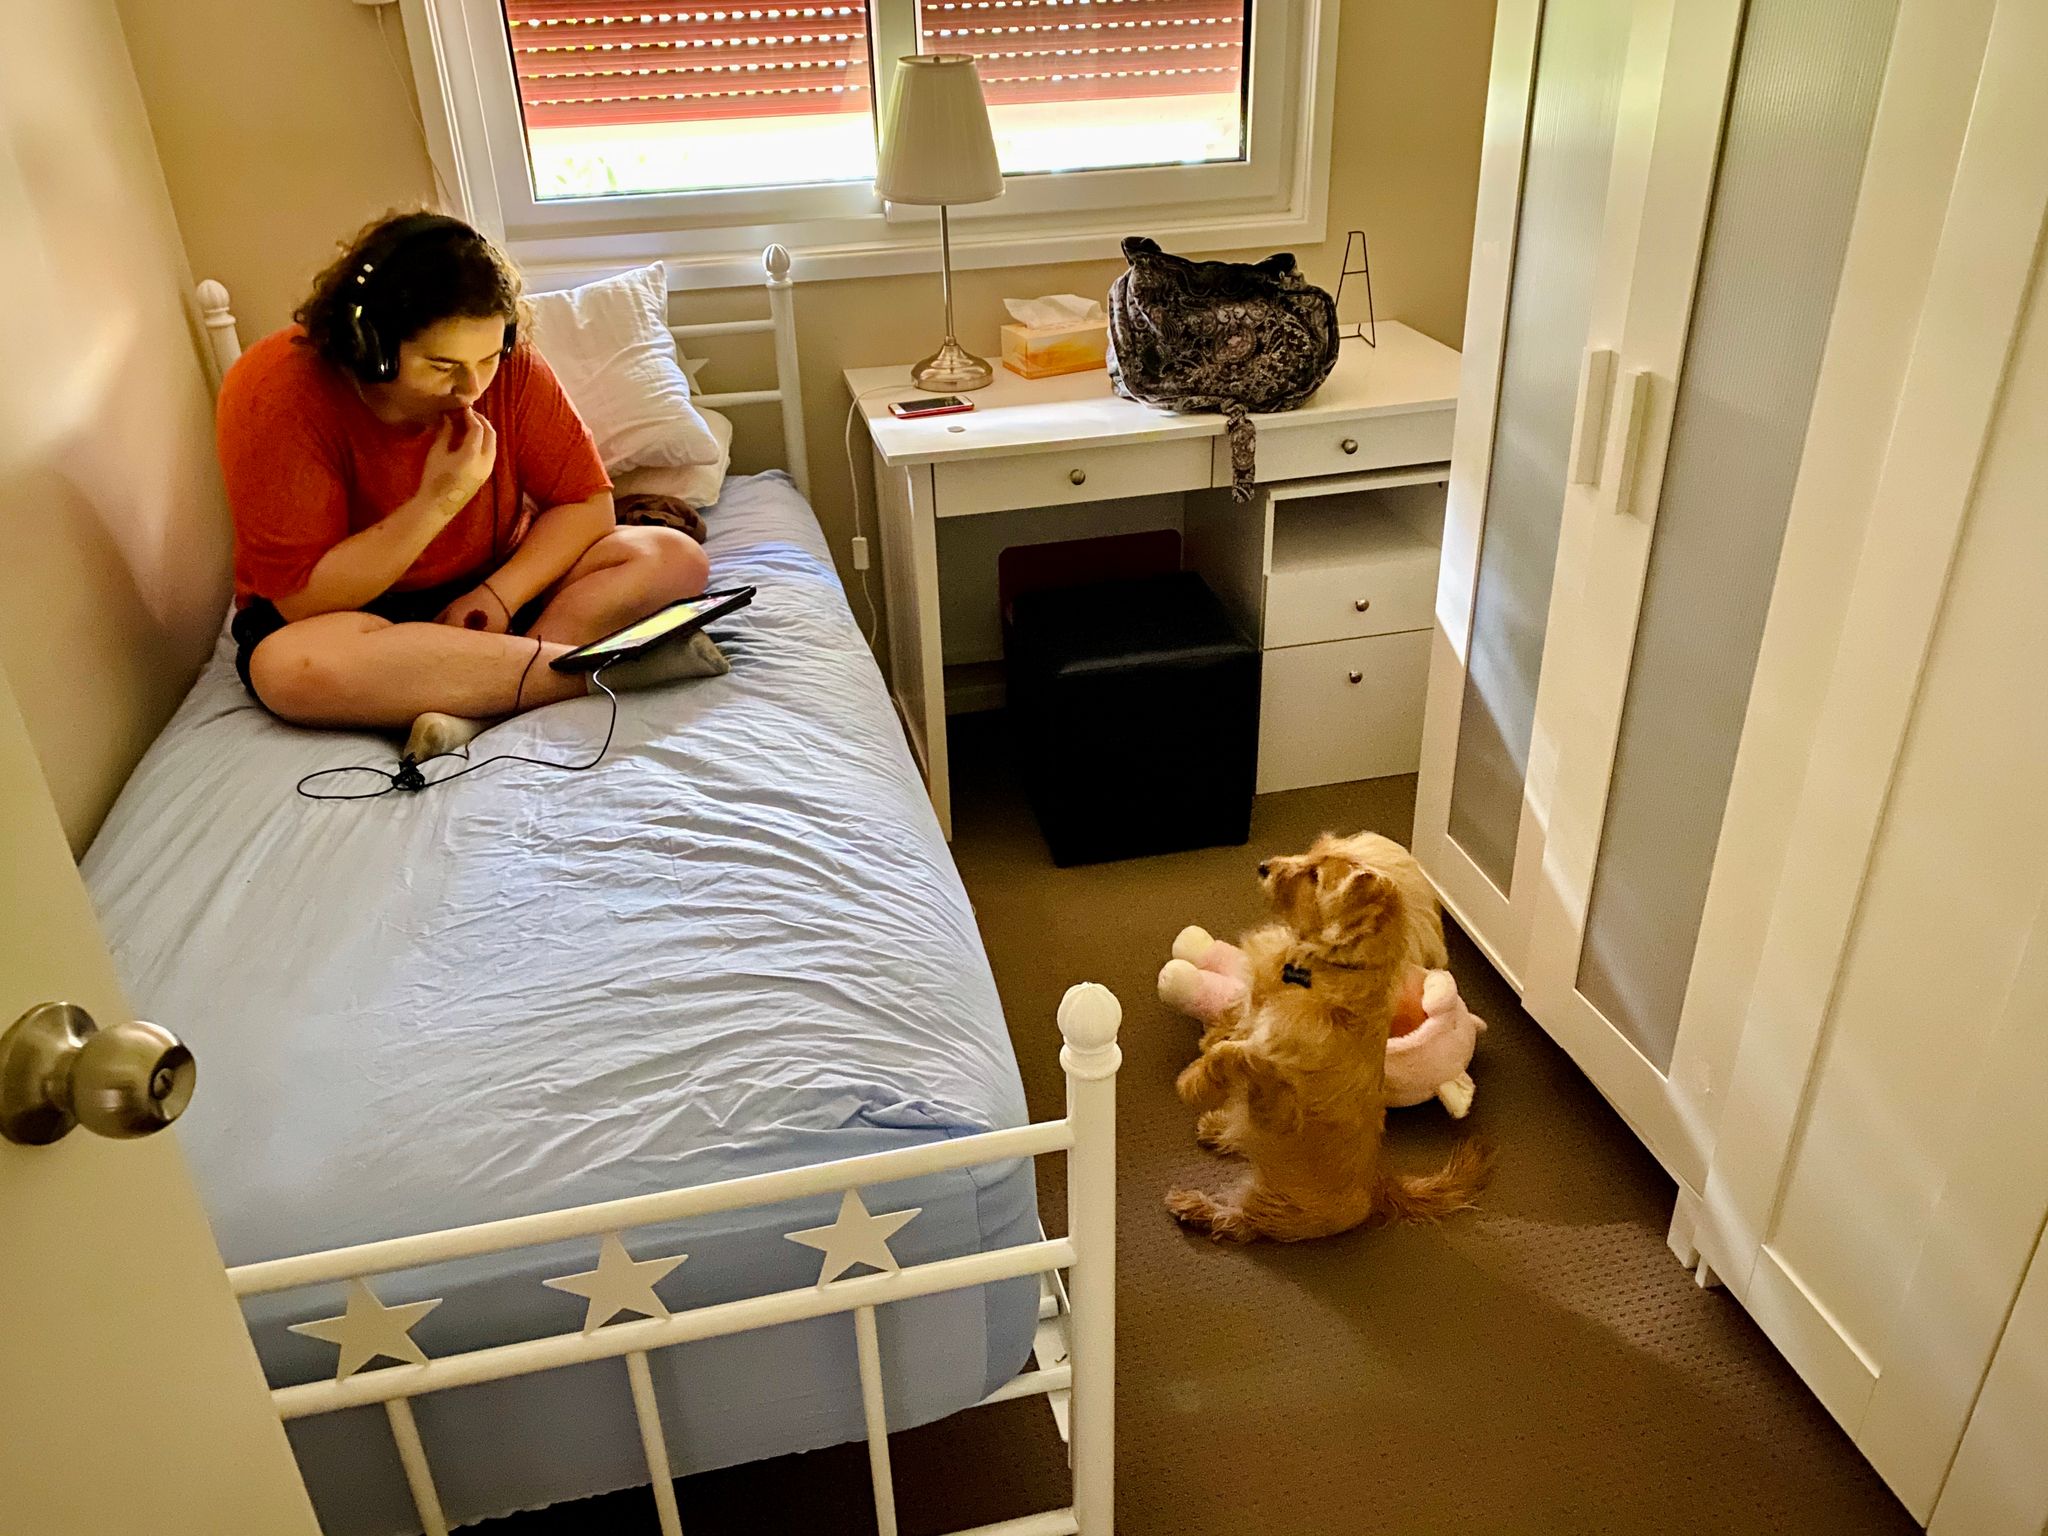 A brown-haired girl is sitting on her bed using her iPad while she eats a carrot, and a small scruffy blonde dog is sitting upright staring intently at her.